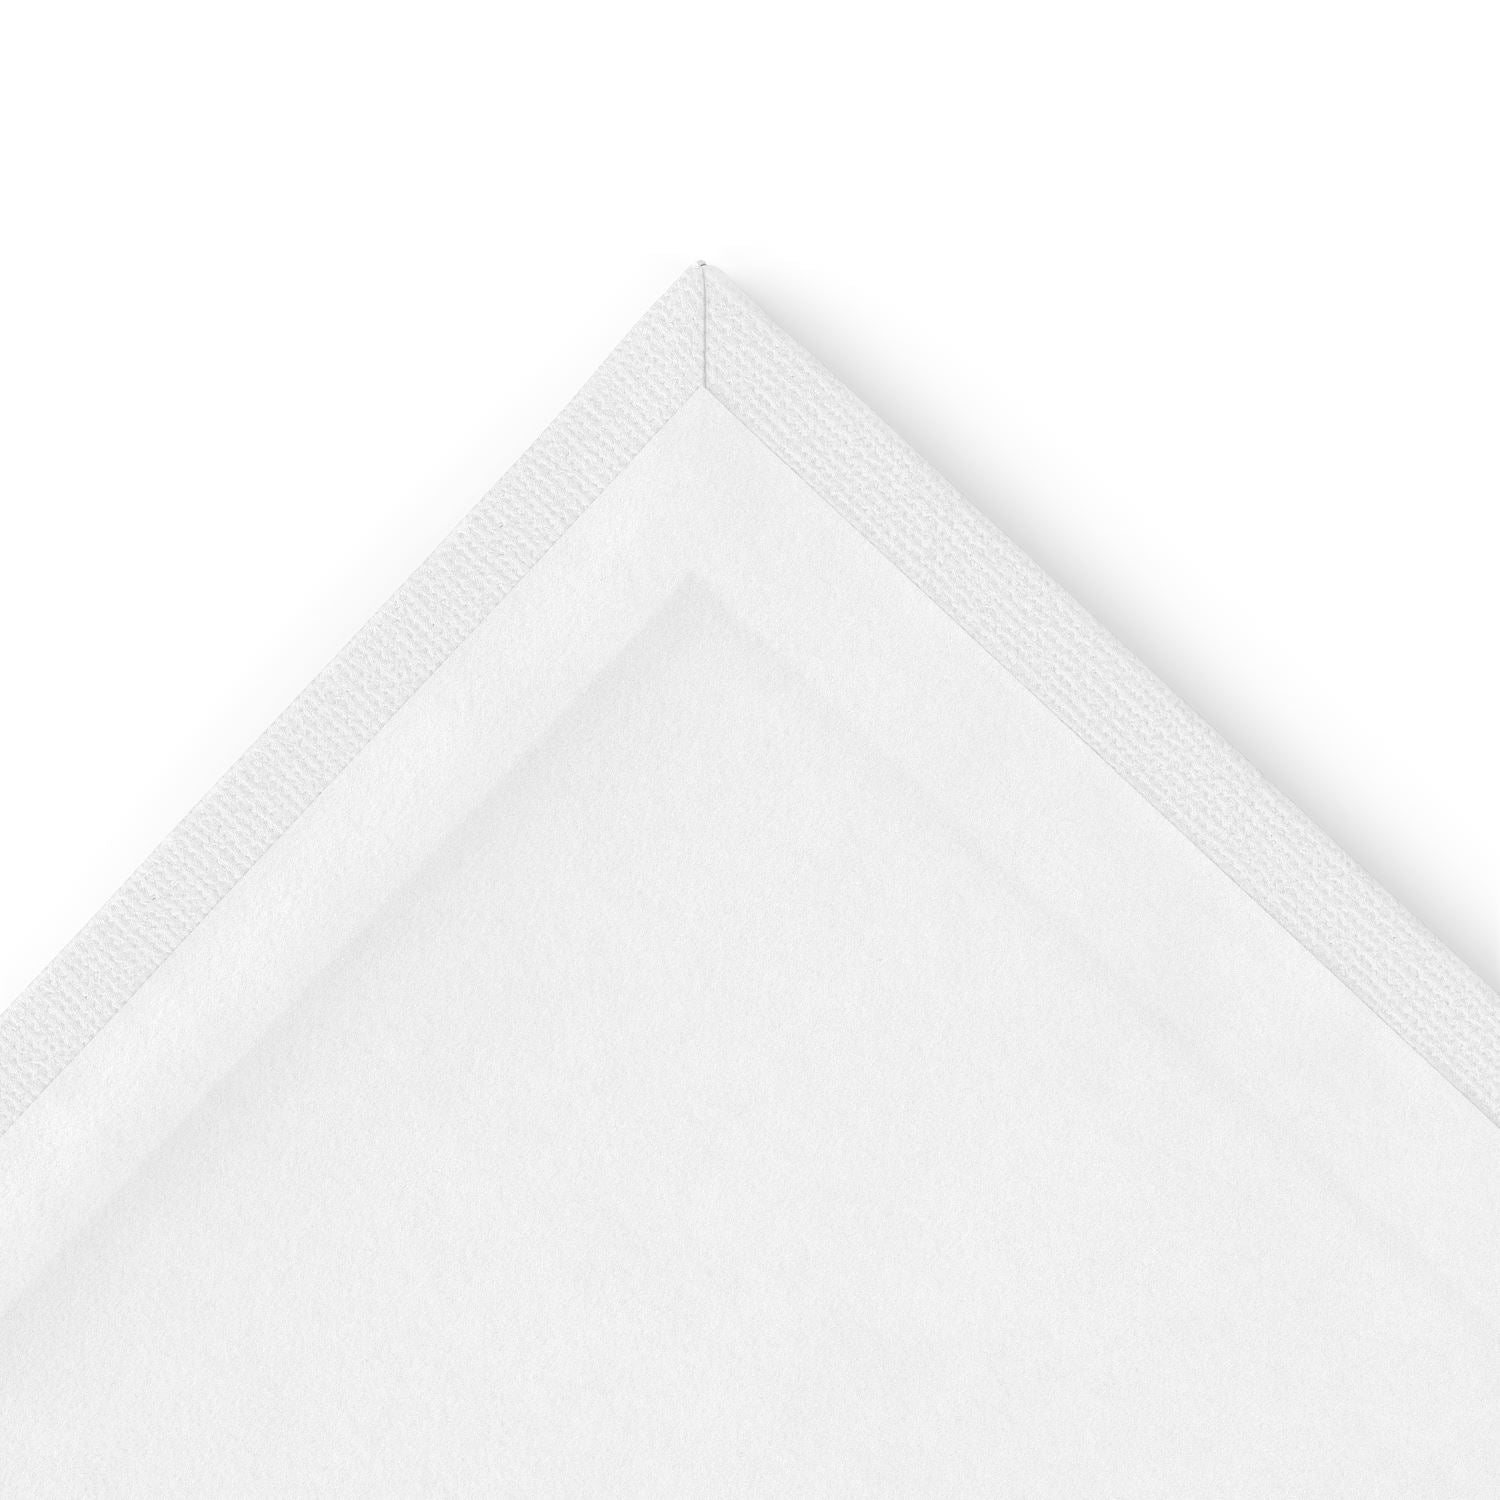 Paint Canvases for Painting, Pack of 4, 8 Inches, Triangle Blank